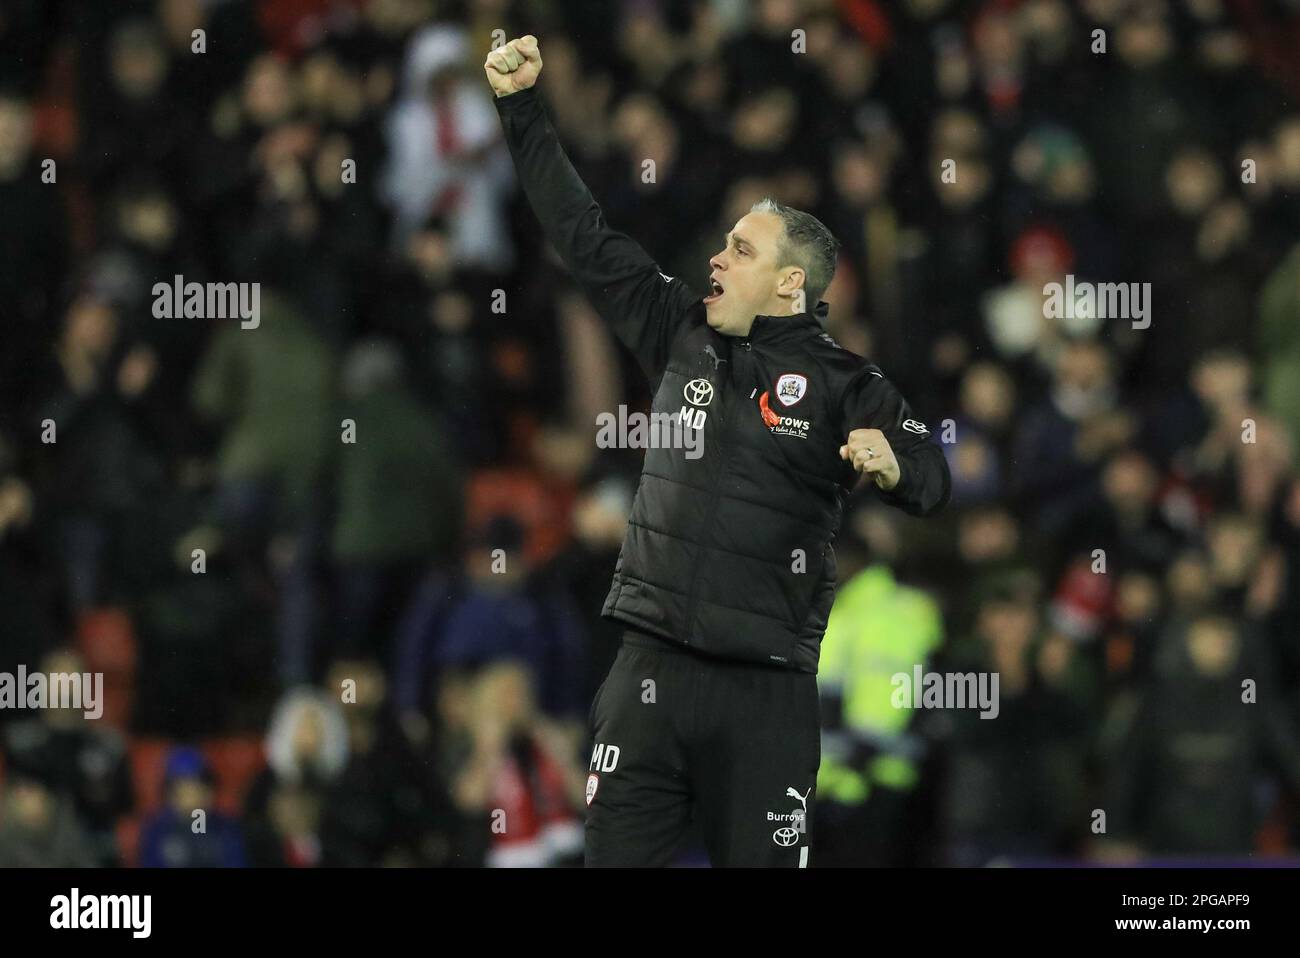 Michael Duff manager of Barnsley punches the air after Barnsley win 4-2 during the Sky Bet League 1 match Barnsley vs Sheffield Wednesday at Oakwell, Barnsley, United Kingdom, 21st March 2023  (Photo by Alfie Cosgrove/News Images) Stock Photo